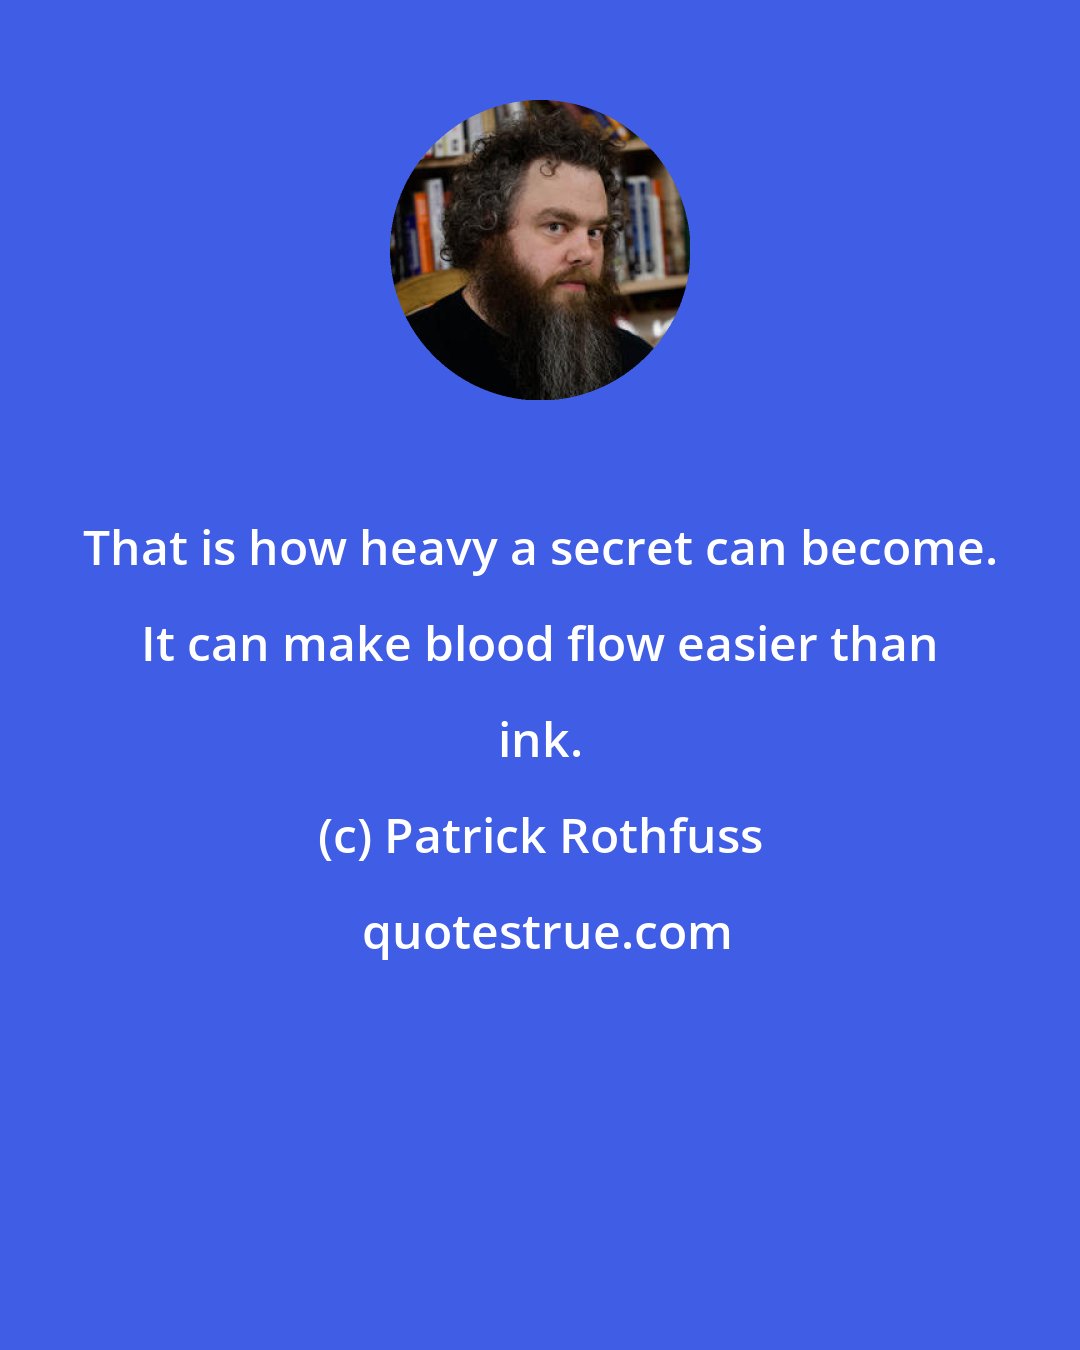 Patrick Rothfuss: That is how heavy a secret can become. It can make blood flow easier than ink.